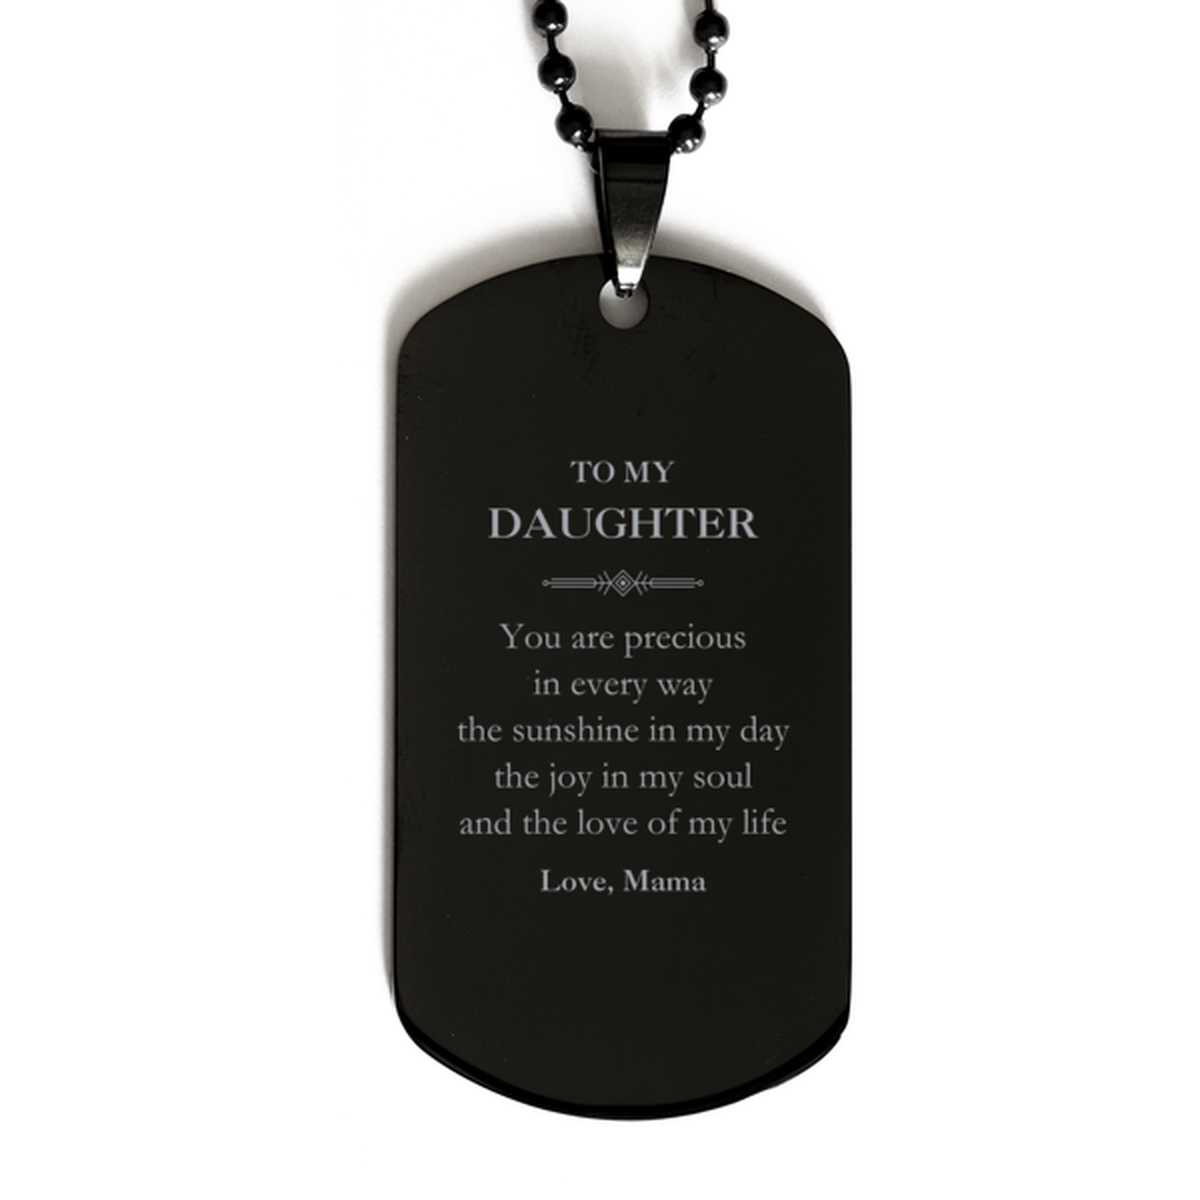 Graduation Gifts for Daughter Black Dog Tag Present from Mama, Christmas Daughter Birthday Gifts Daughter You are precious in every way the sunshine in my day. Love, Mama